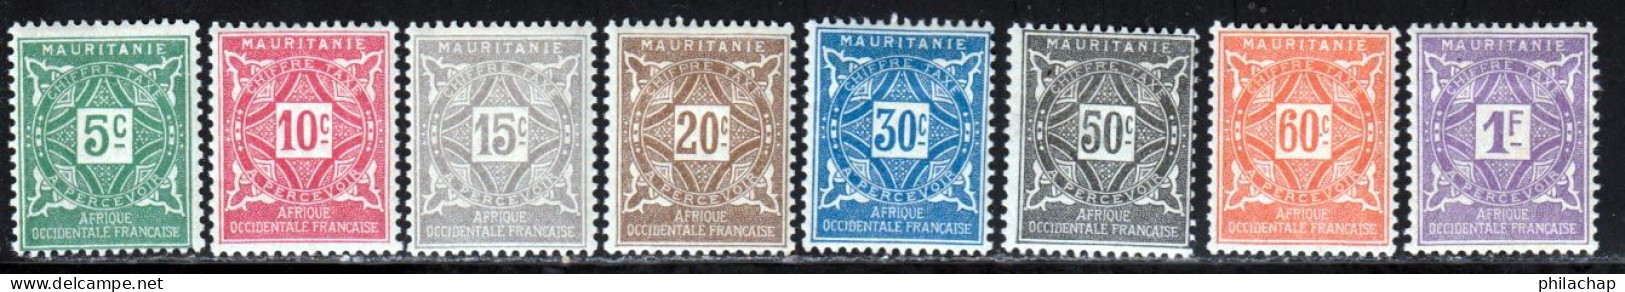 Mauritanie Taxe 1914 Yvert 17 / 24 * TB Charniere(s) - Unused Stamps